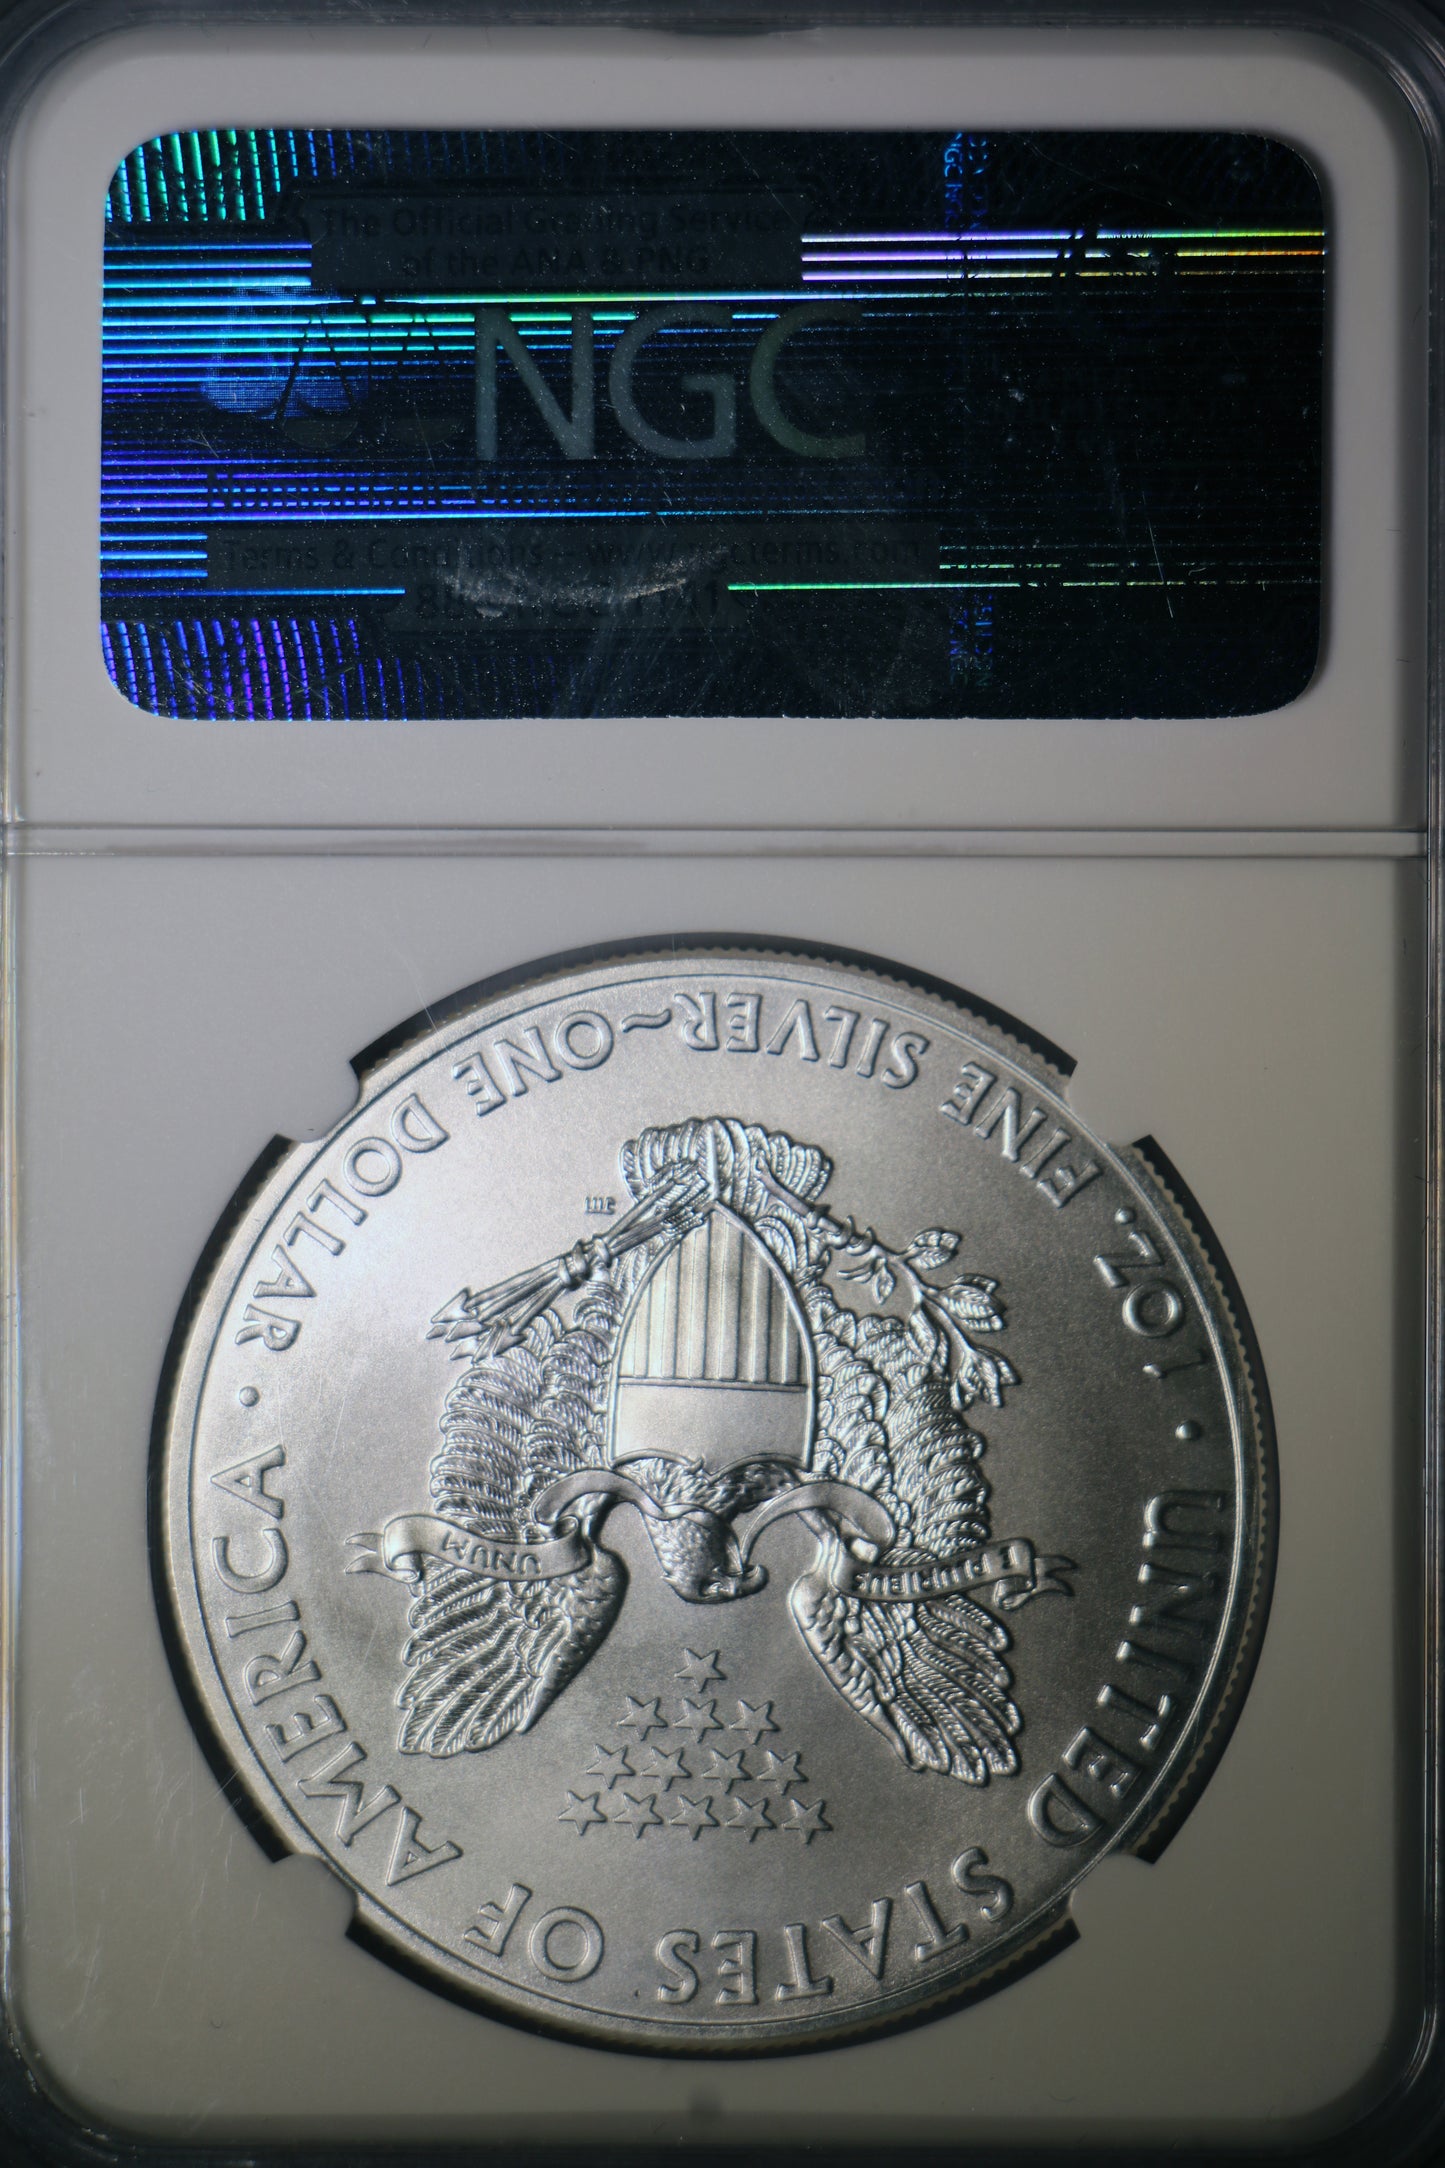 2015 NGC MS70 American Silver Eagle First Releases Eagle Label